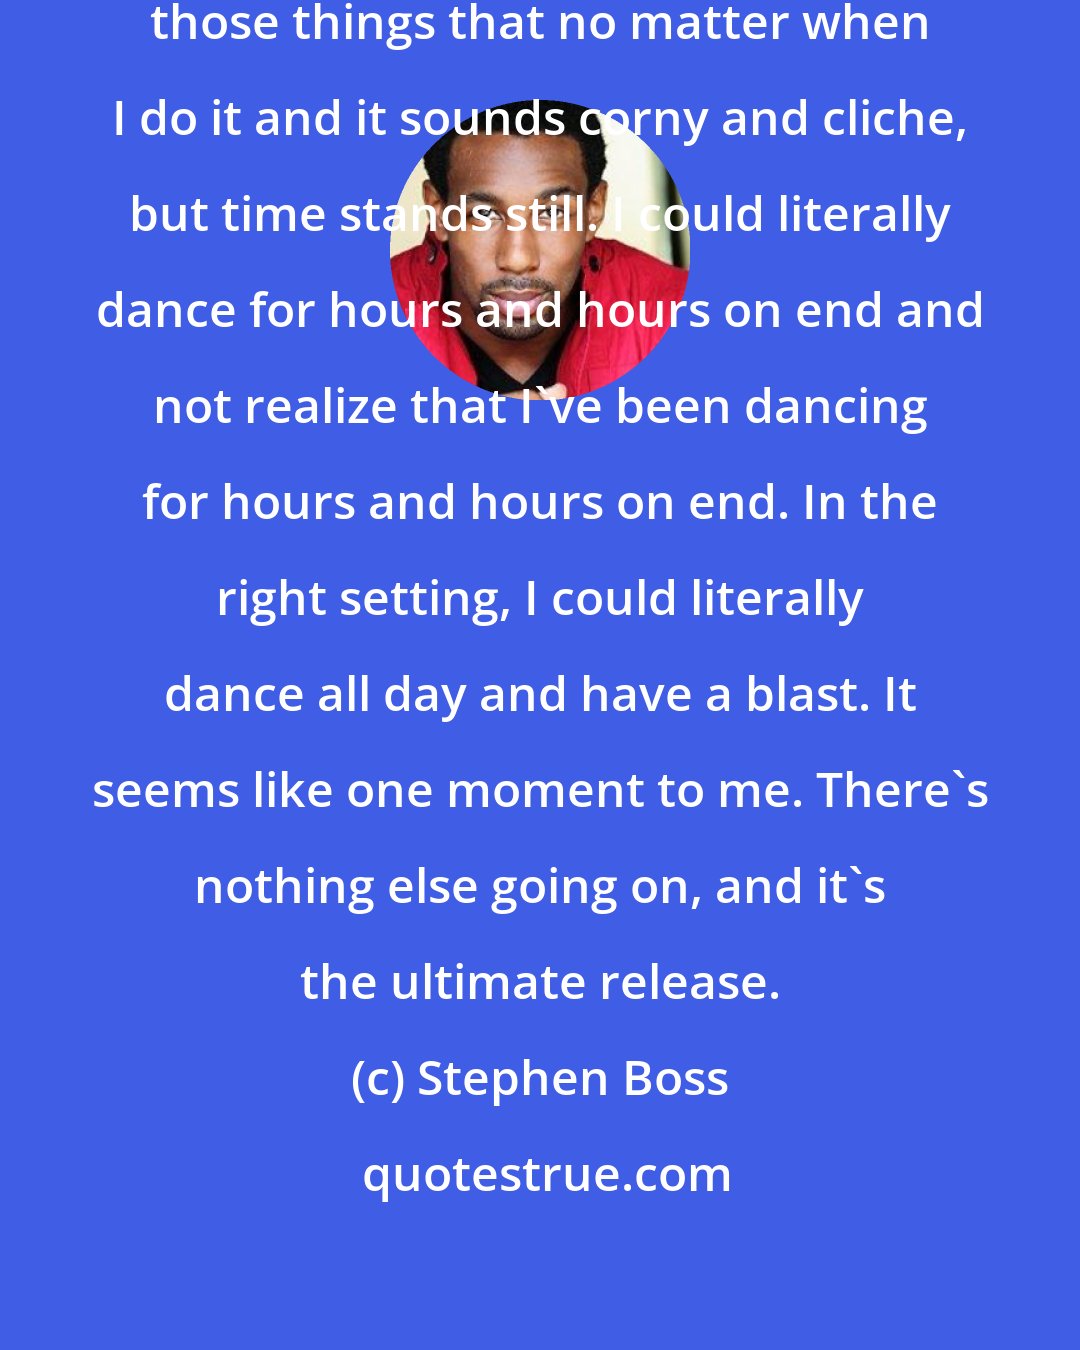 Stephen Boss: Dancing is still, for me, one of those things that no matter when I do it and it sounds corny and cliche, but time stands still. I could literally dance for hours and hours on end and not realize that I've been dancing for hours and hours on end. In the right setting, I could literally dance all day and have a blast. It seems like one moment to me. There's nothing else going on, and it's the ultimate release.